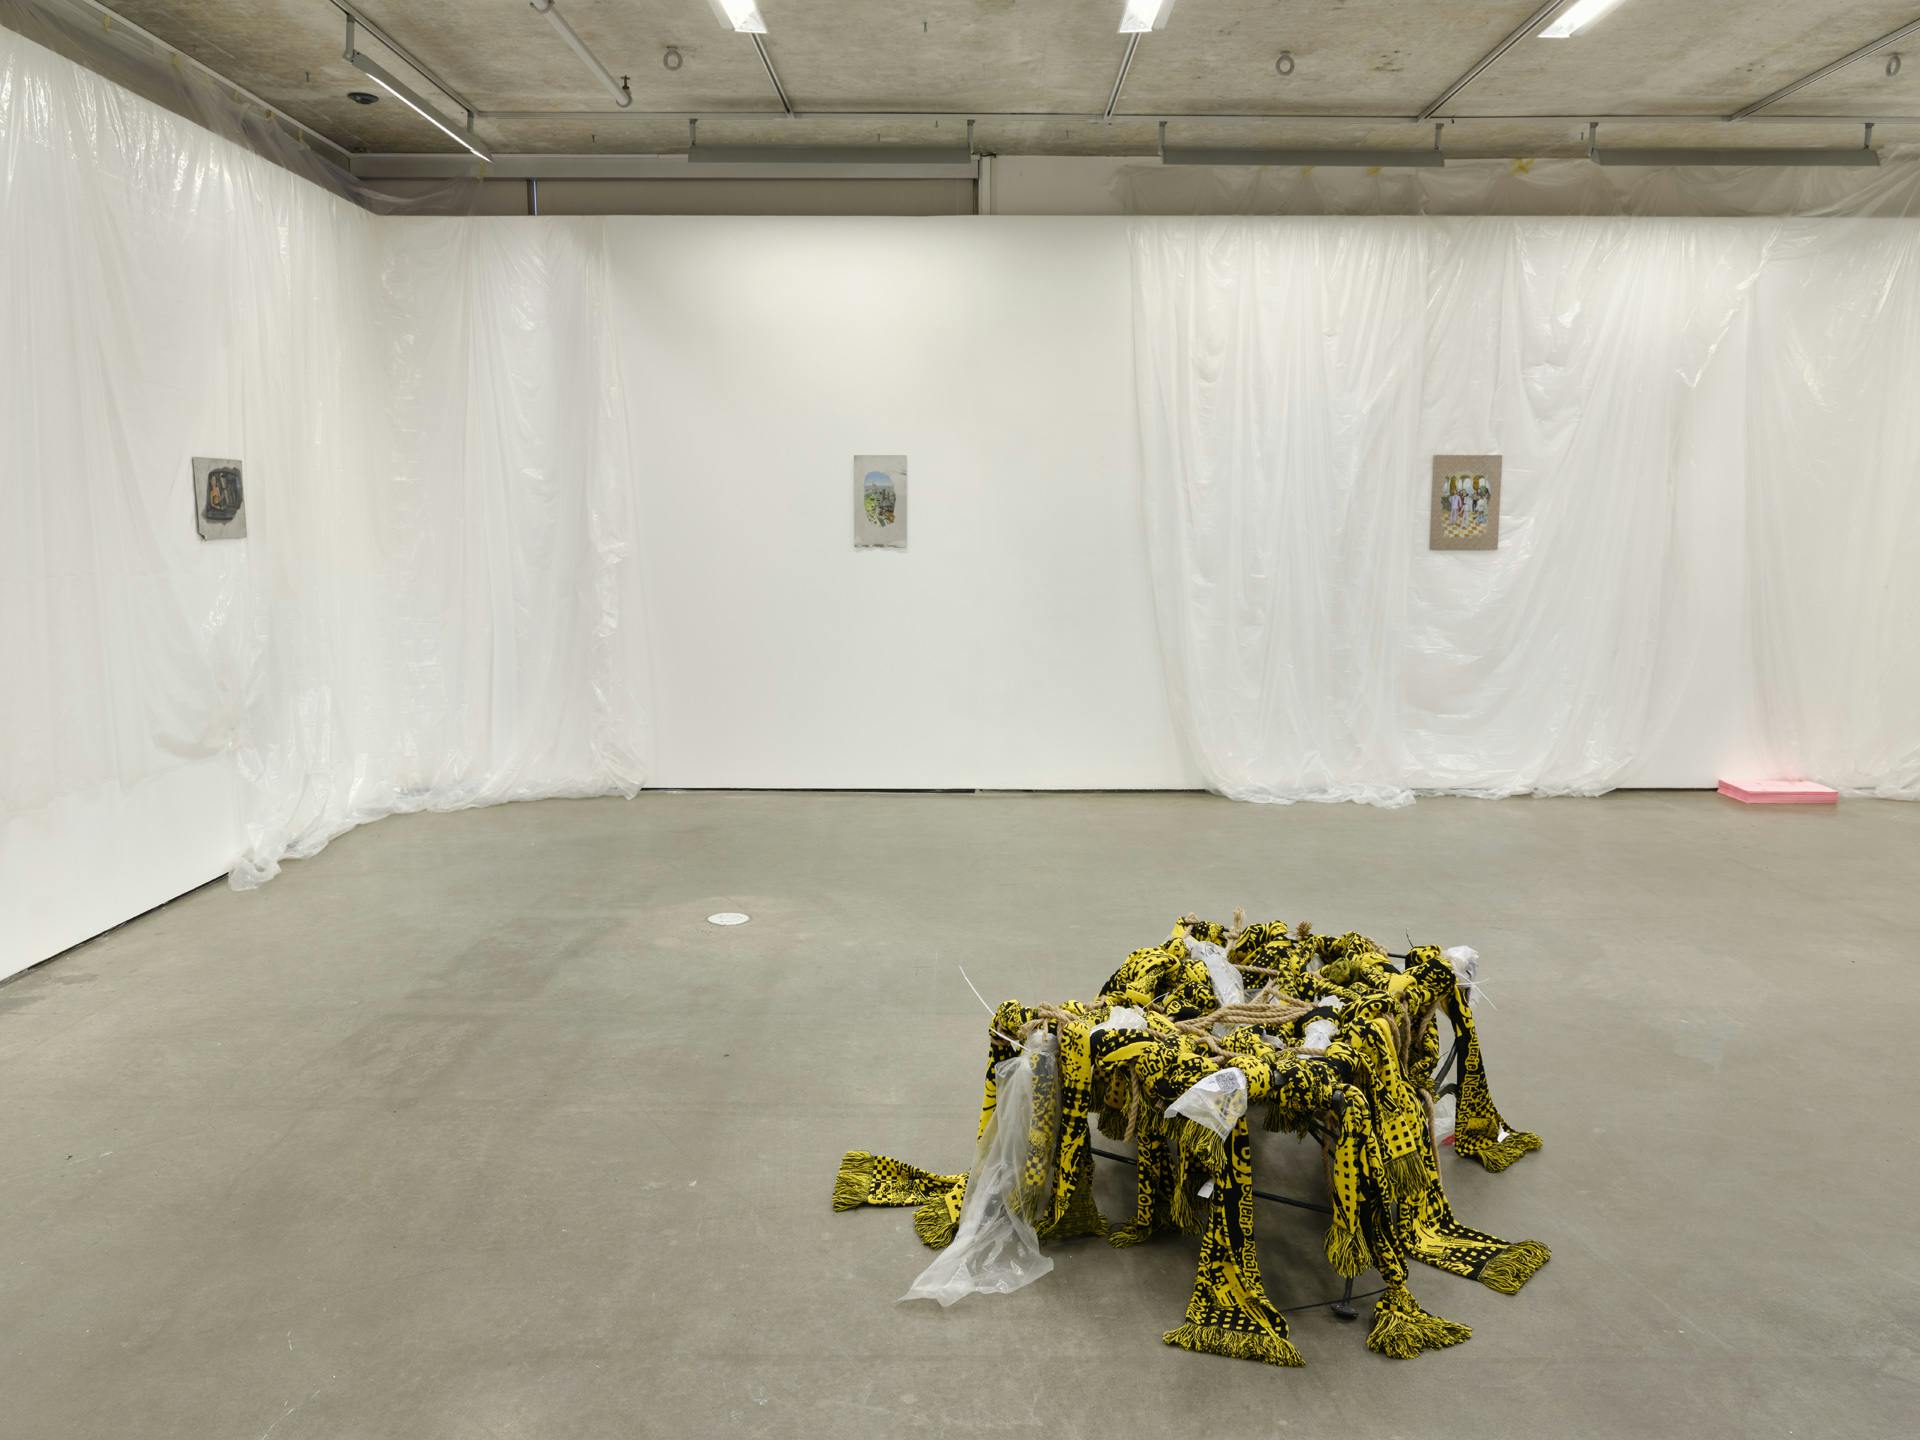  Four small paintings hang on gallery walls draped with translucent plastic sheets. A stack of pink paper and a sculpture made of yellow textiles, plastic and rope sits on the floor. 